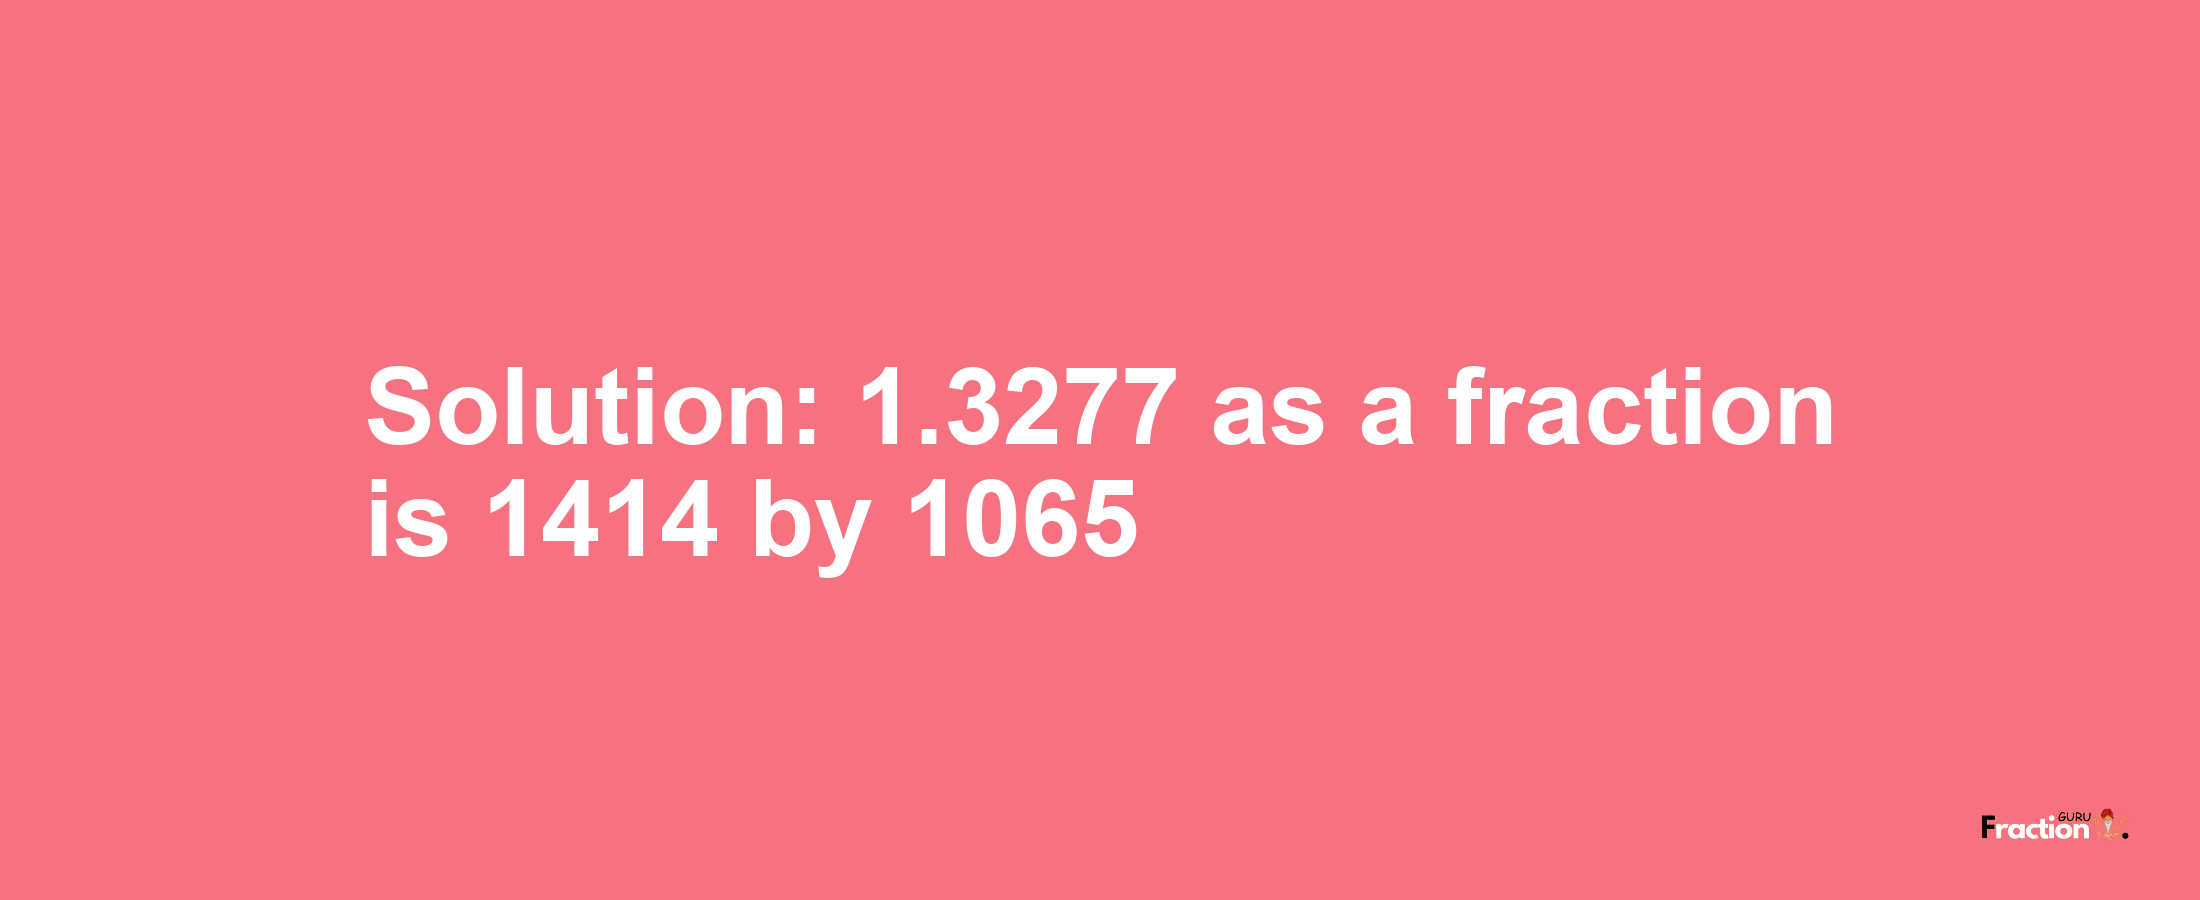 Solution:1.3277 as a fraction is 1414/1065